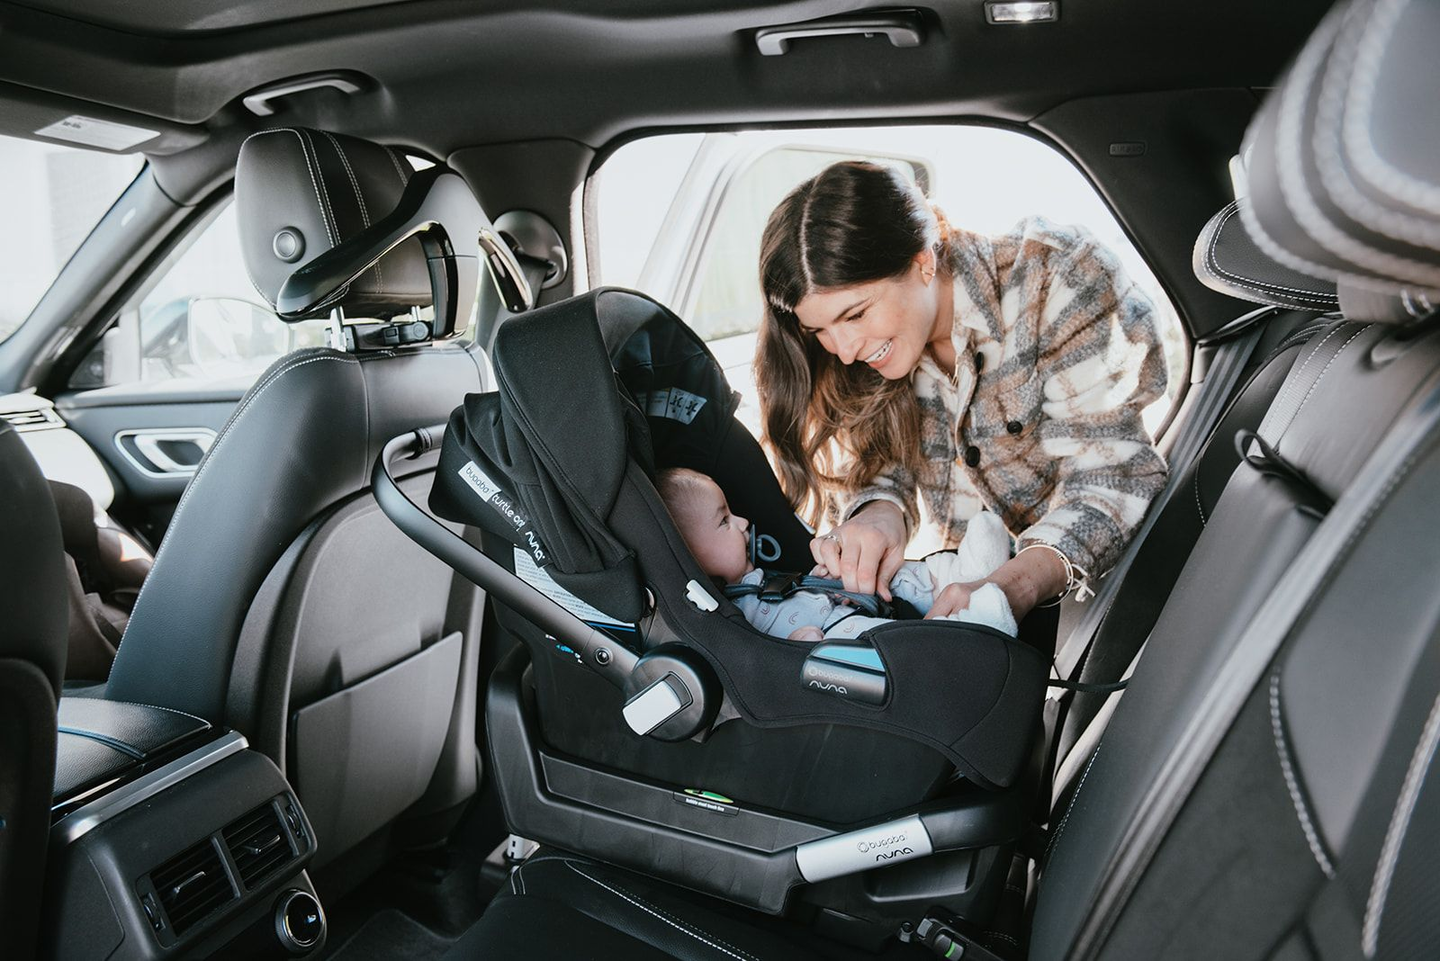 How to get stains out of car seats in 8 steps | Bugaboo